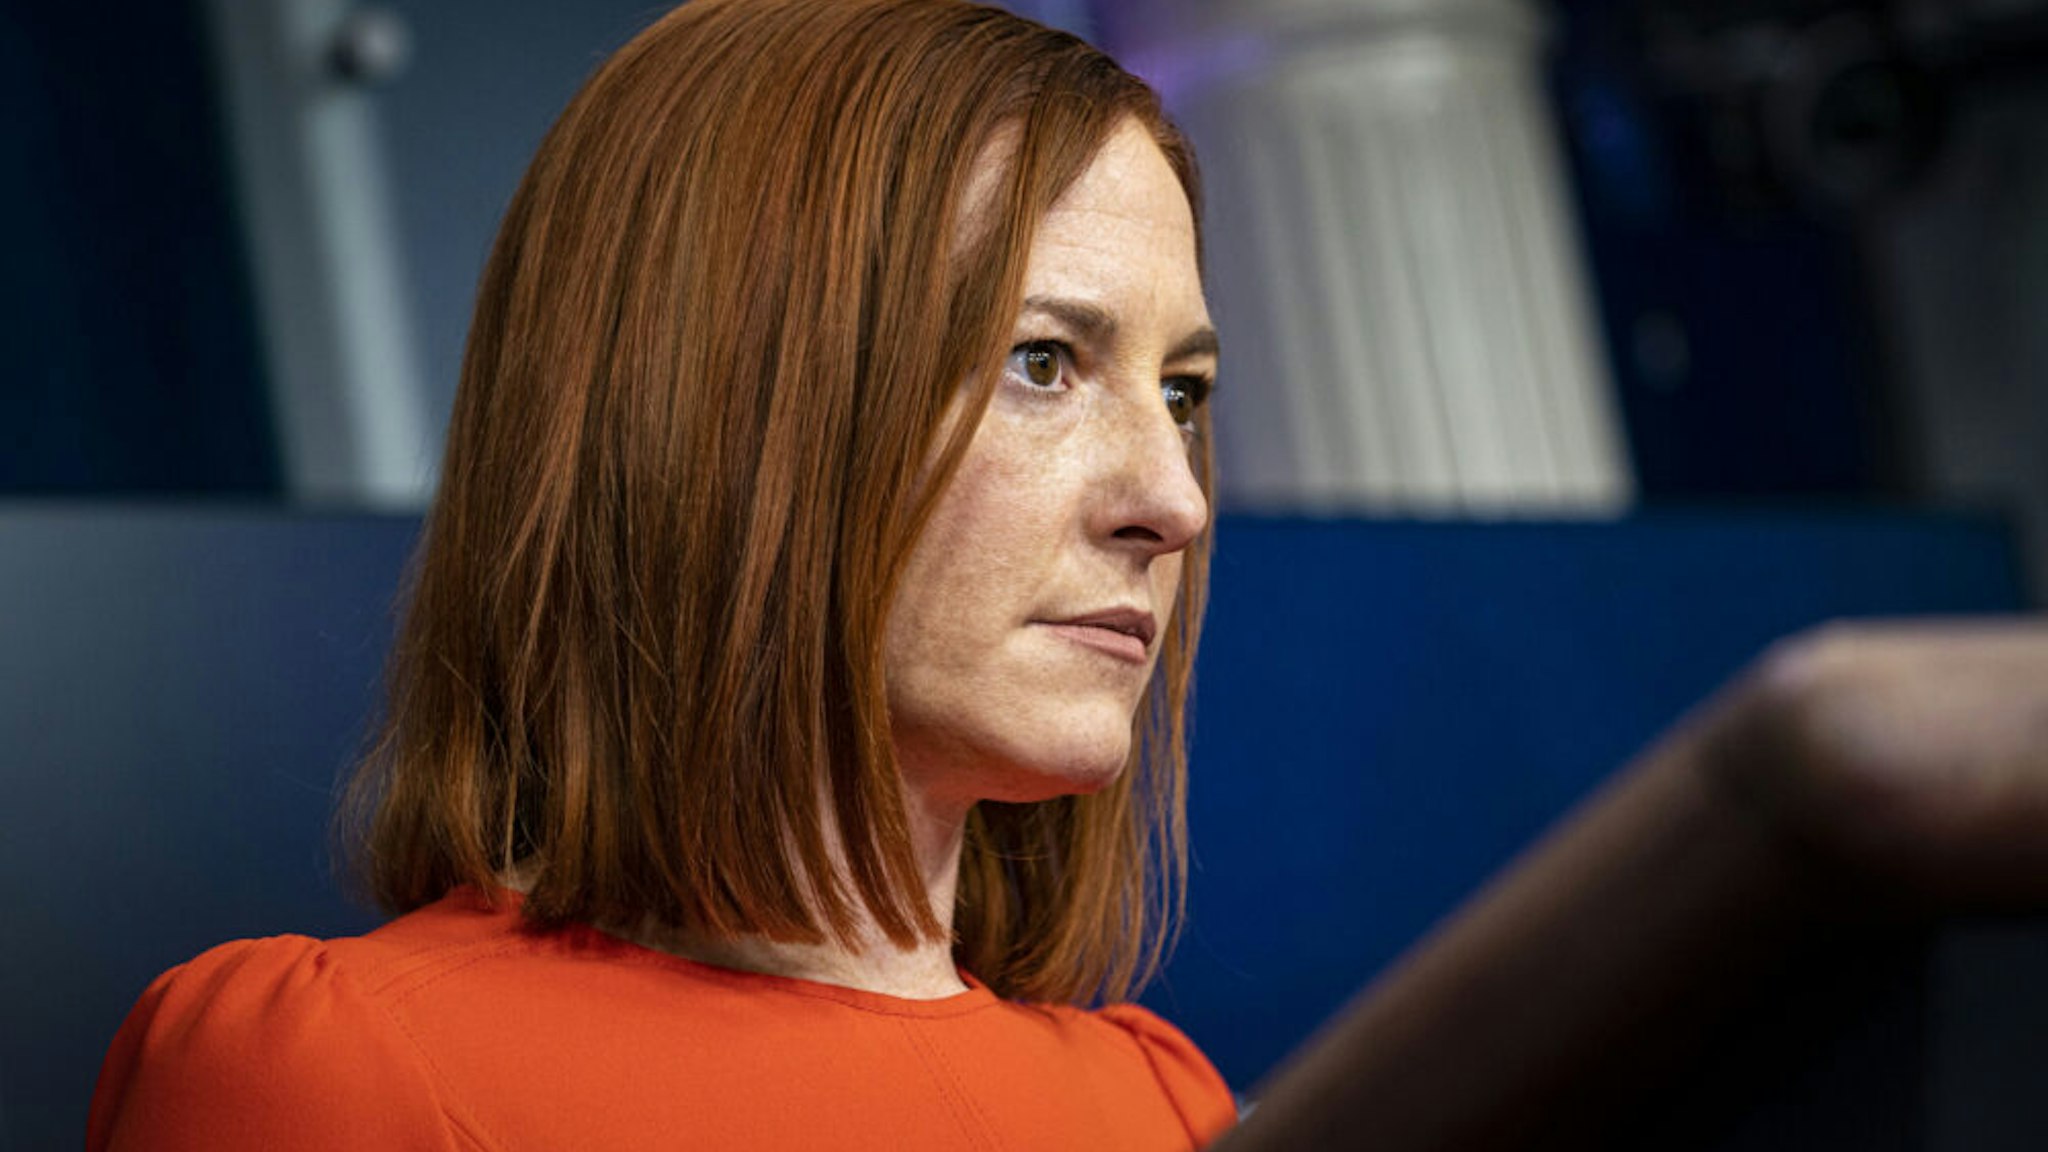 Jen Psaki, White House press secretary, listens during a news conference in the James S. Brady Press Briefing Room at the White House in Washington, D.C., U.S., on Thursday, Jan. 21, 2021. Biden in his first full day in office plans to issue a sweeping set of executive orders to tackle the raging Covid-19 pandemic that will rapidly reverse or refashion many of his predecessor's most heavily criticized policies.